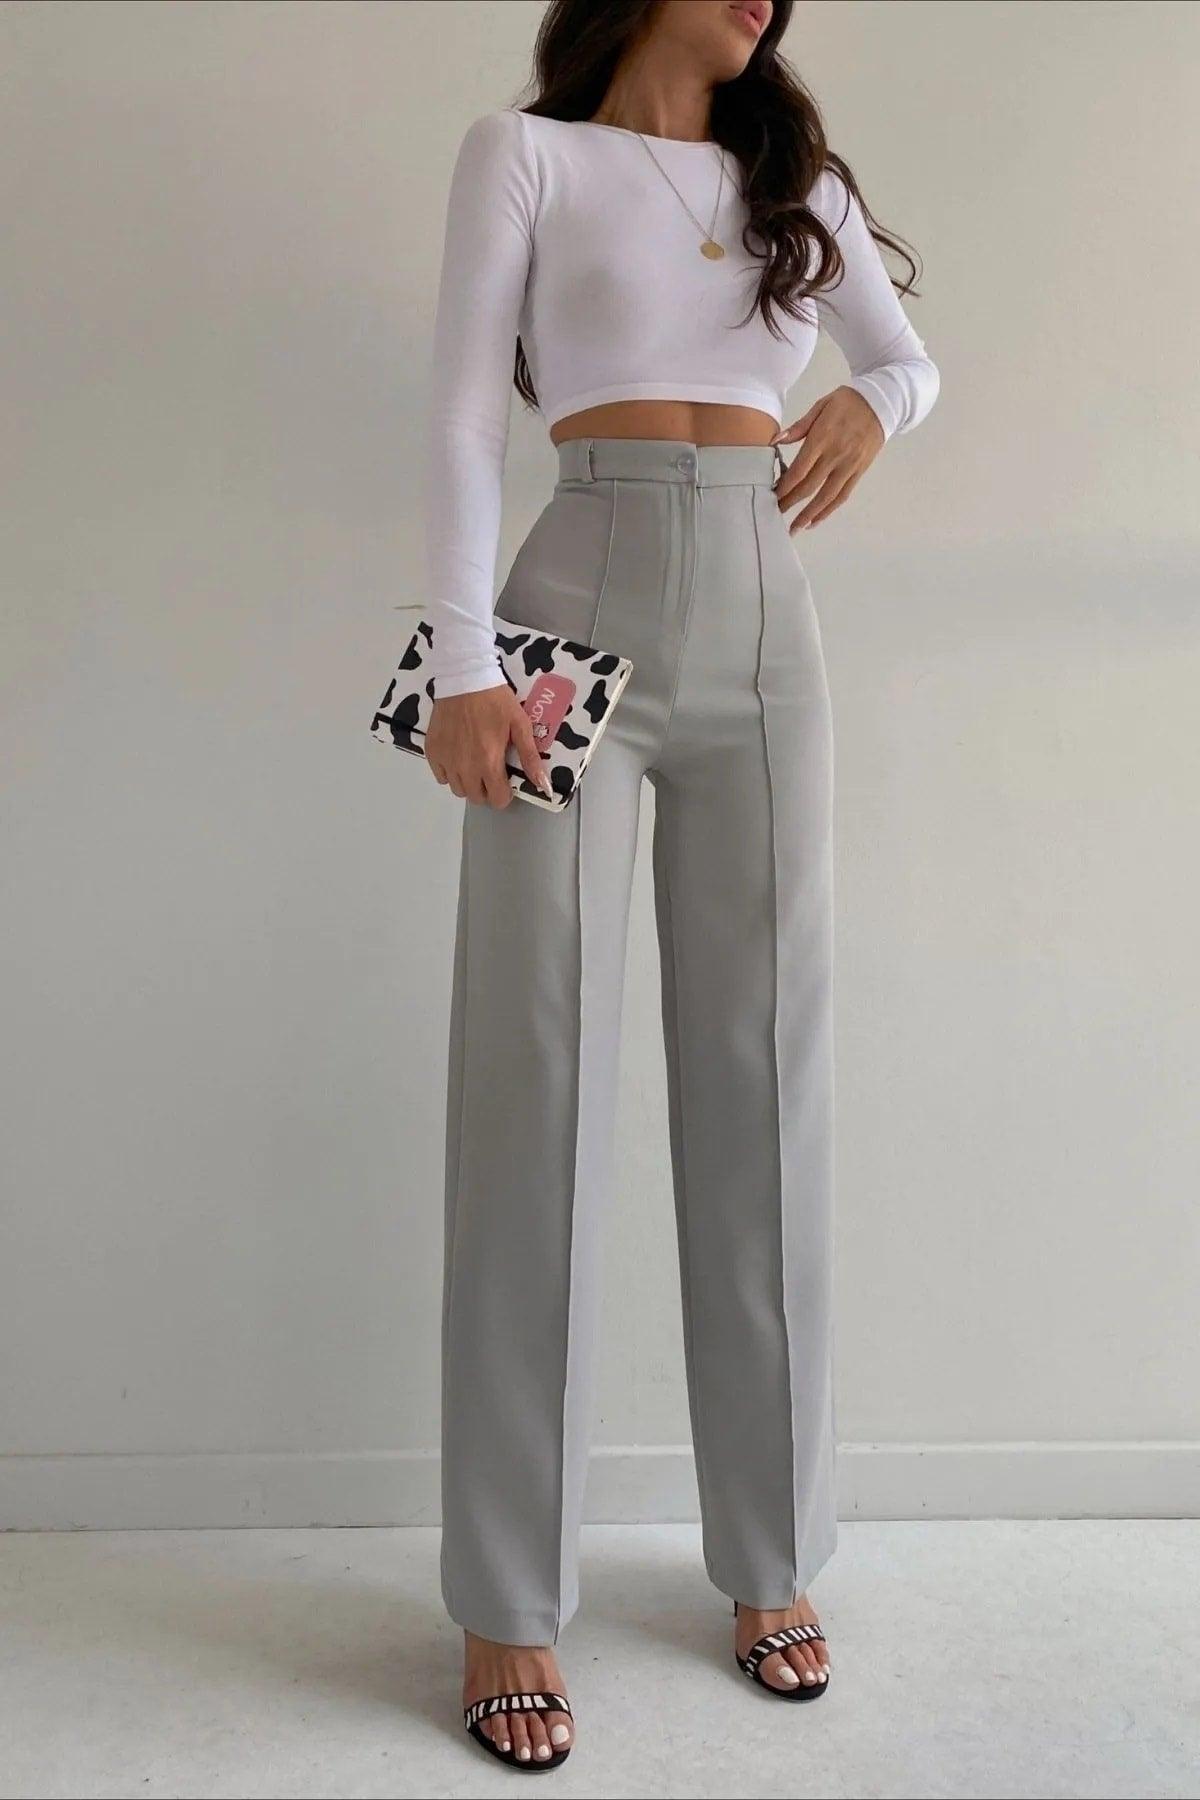 Women's Gray Front Stitched Detailed High Waist Palazzo Trousers - Swordslife